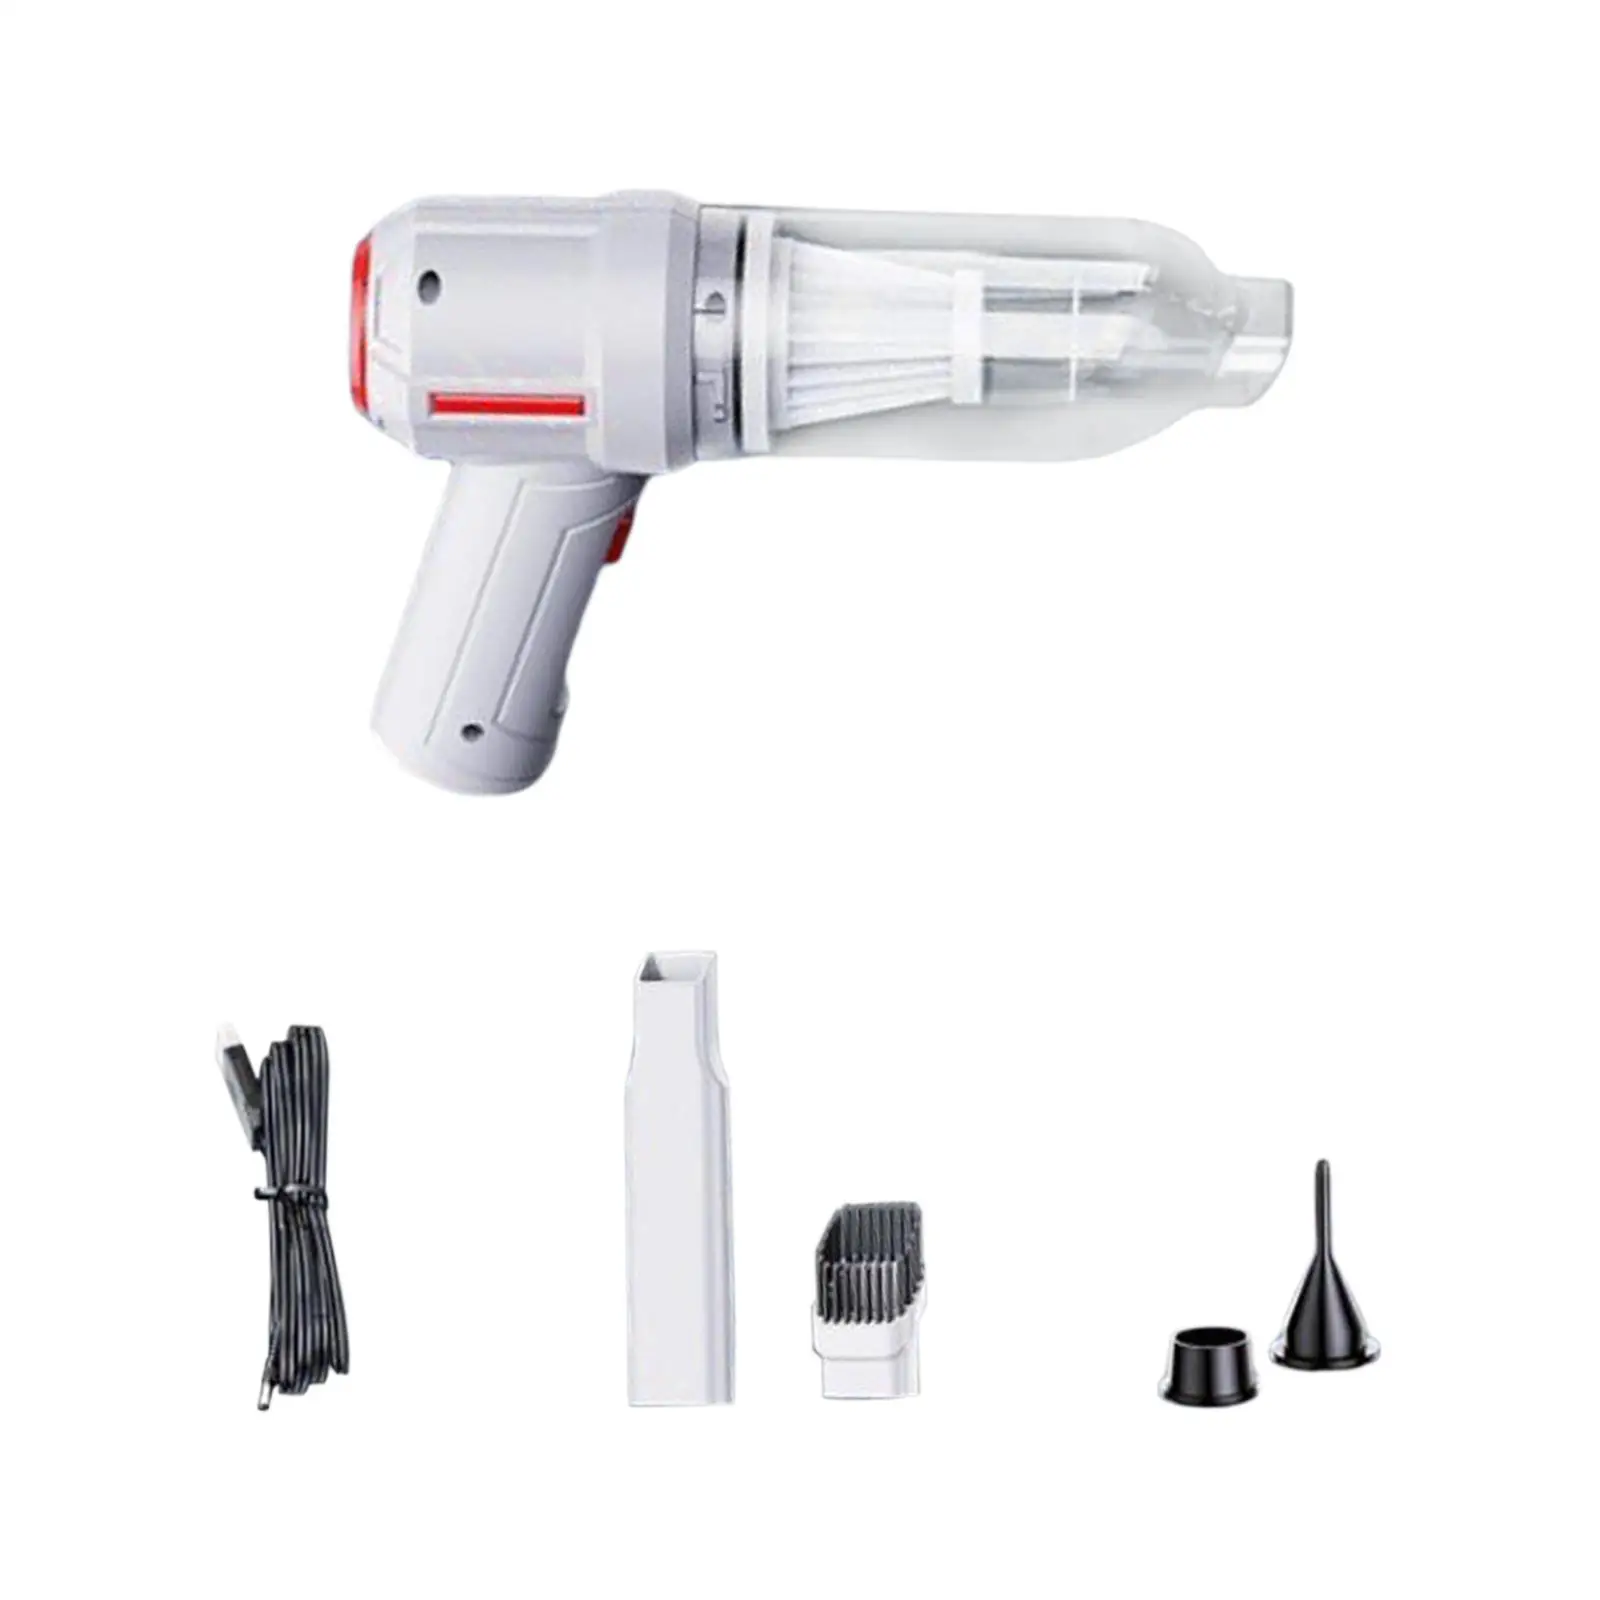 Portable Cordless Handheld Vacuum Cleaner Rechargeable Washable Filtration for Car Home Carpet